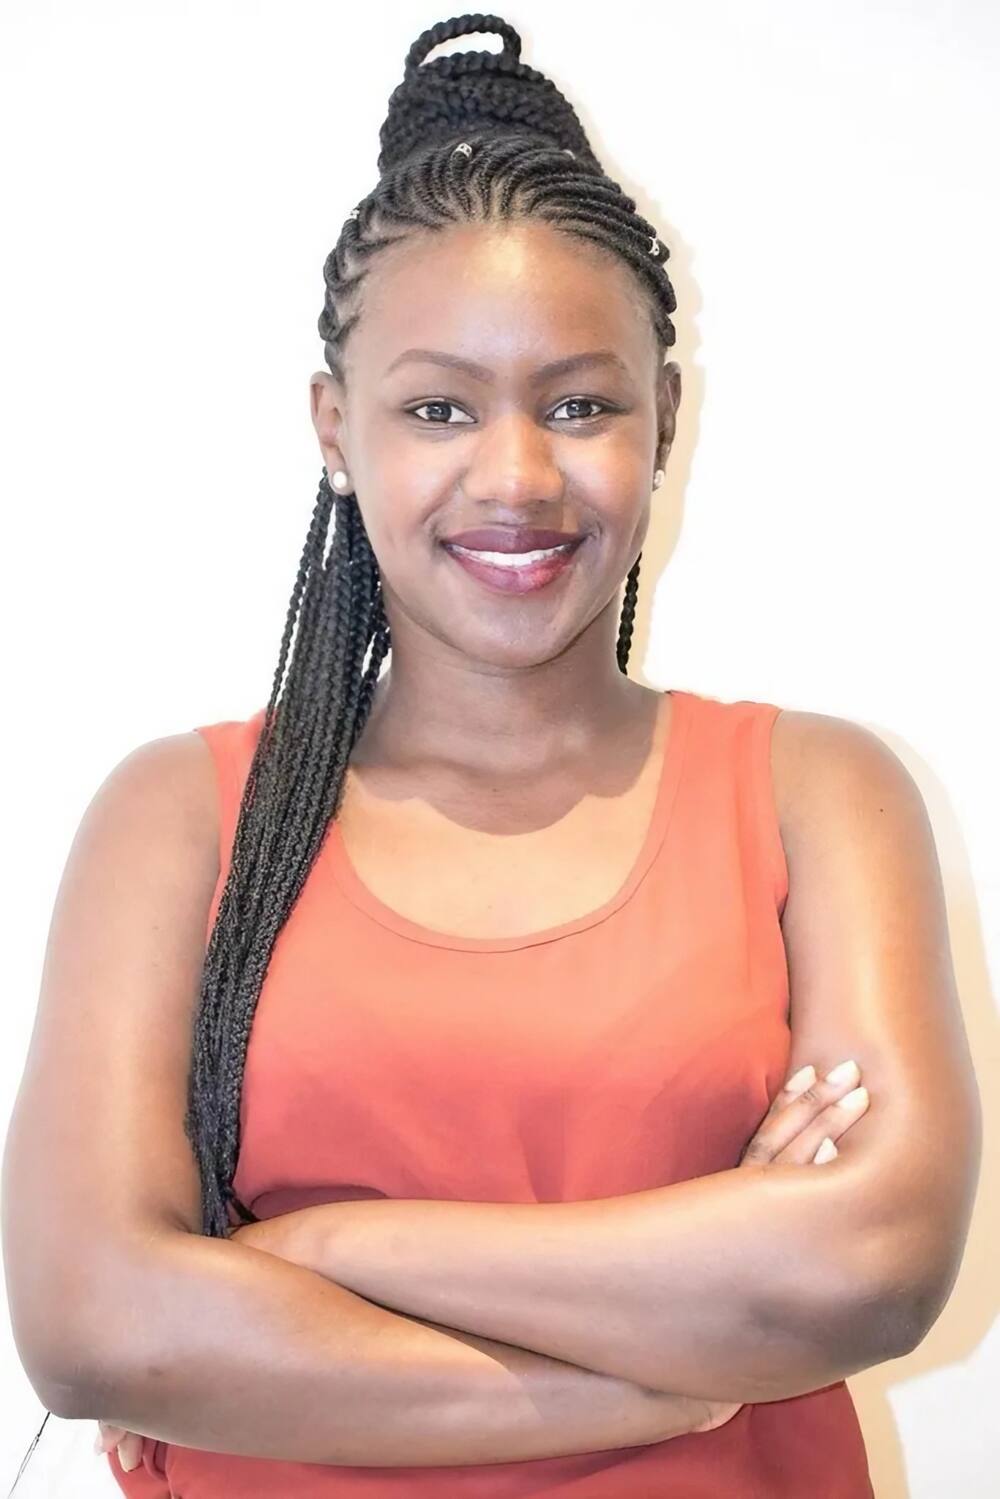 Shirlene Nafula is the founder and CEO of Crystal River Products